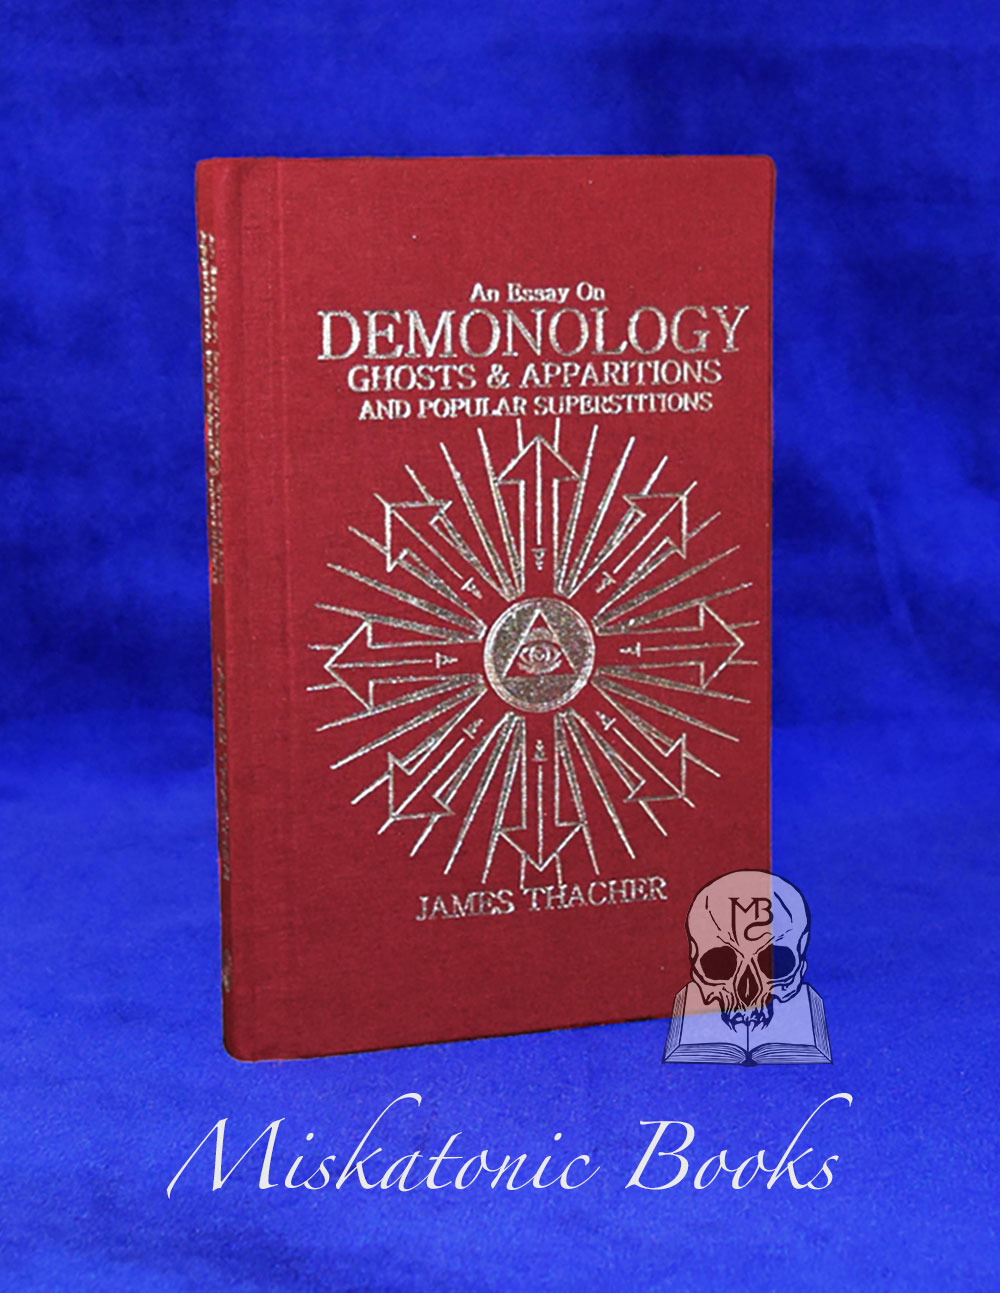 An Essay on Demonology, Ghosts and Apparitions, and Popular Superstitions by James Thacher - Limited Edition Hardcover